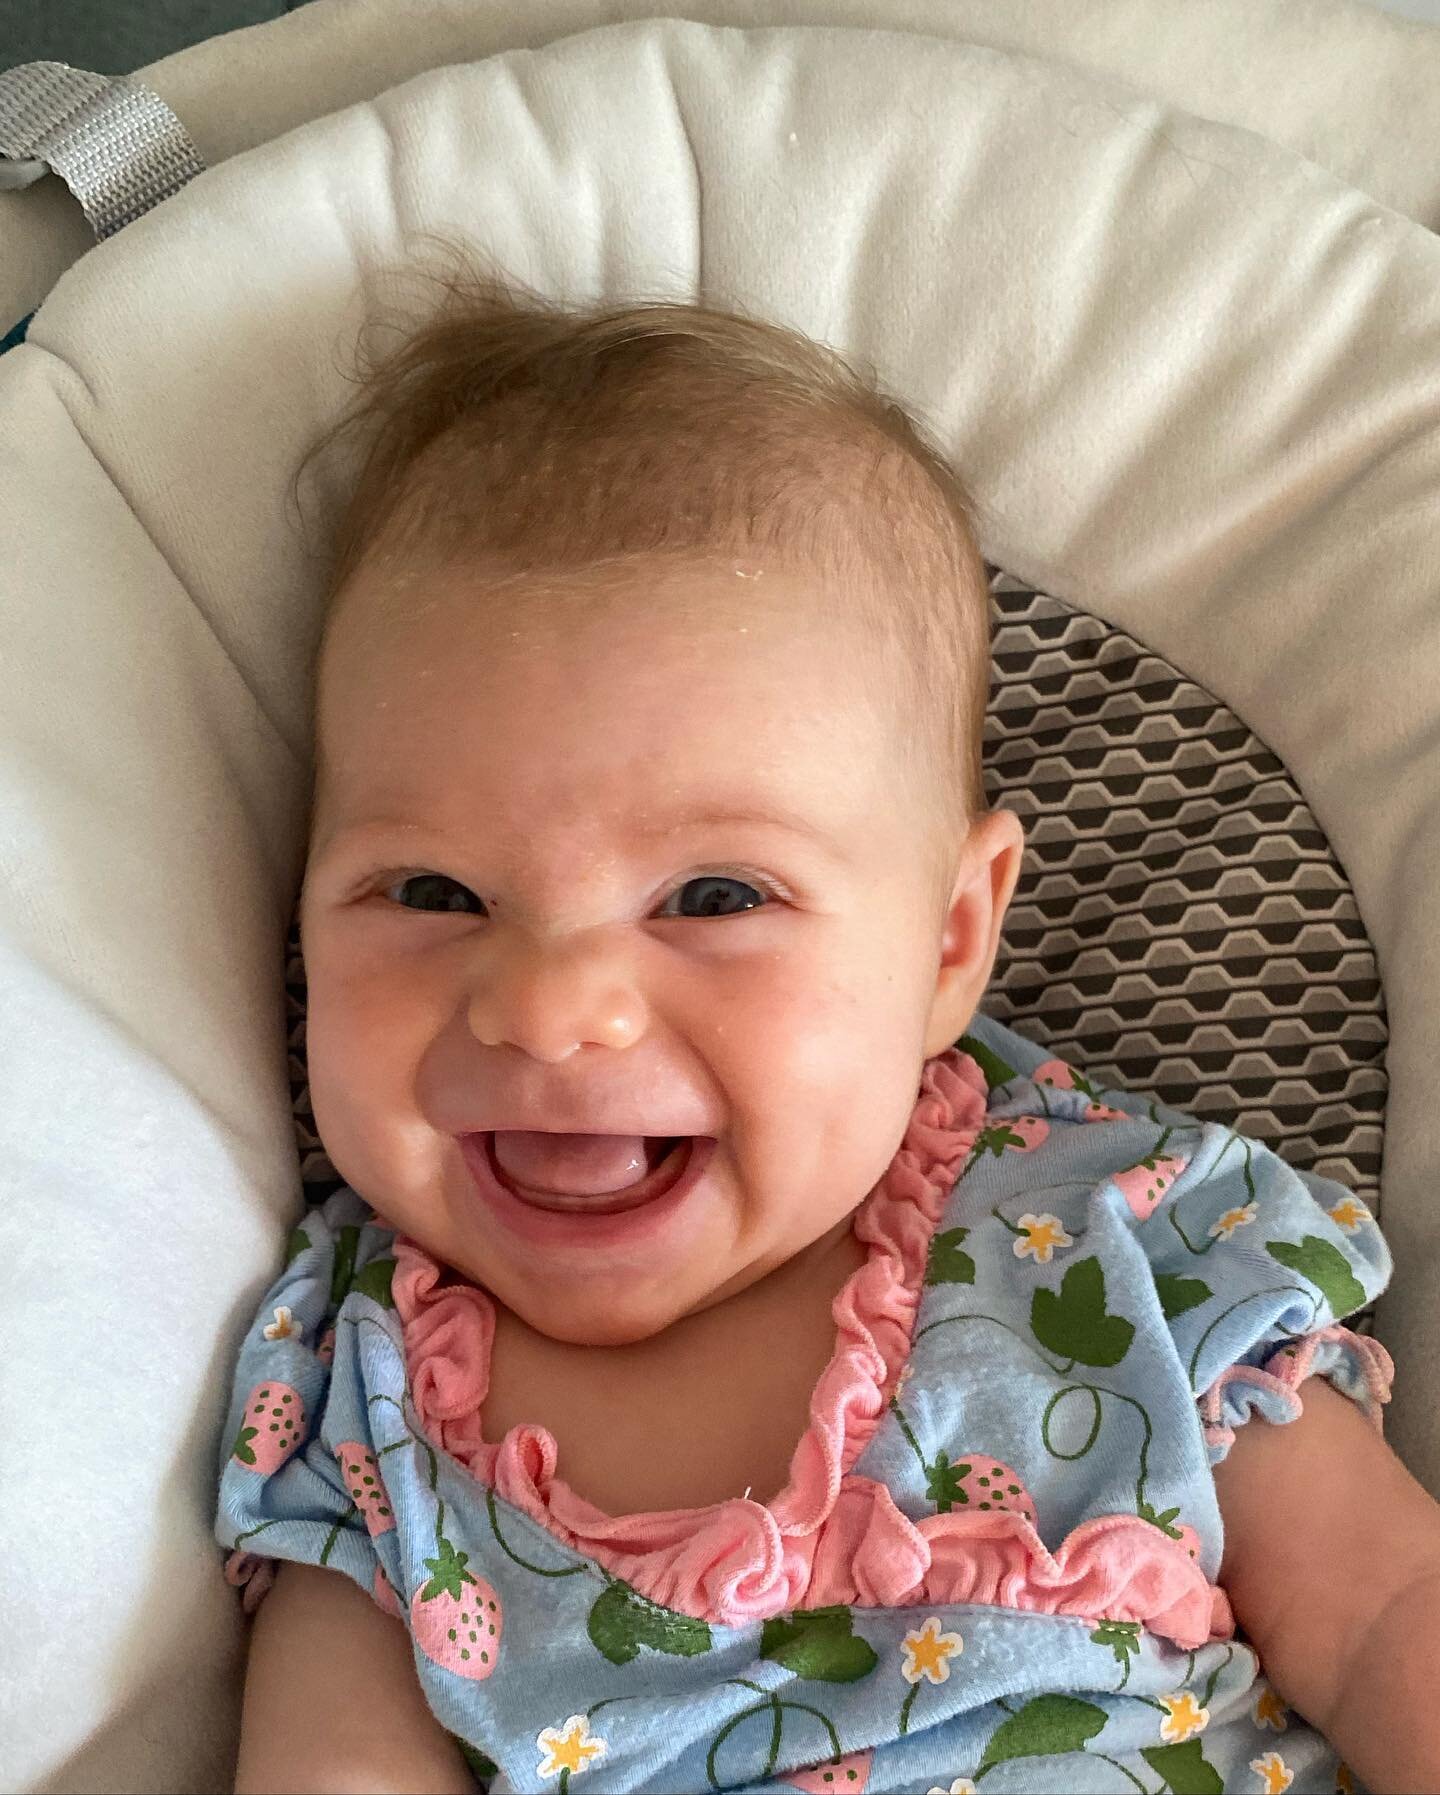 2 months with our joyful little Matilda!! She smiles all the time and is curious about everything around her 💖👶🏼💕
 #babygirl #2monthsold #littlemisssunshine #purejoy #mybaby #love #proudparents❤️ #twomonthsold #baby